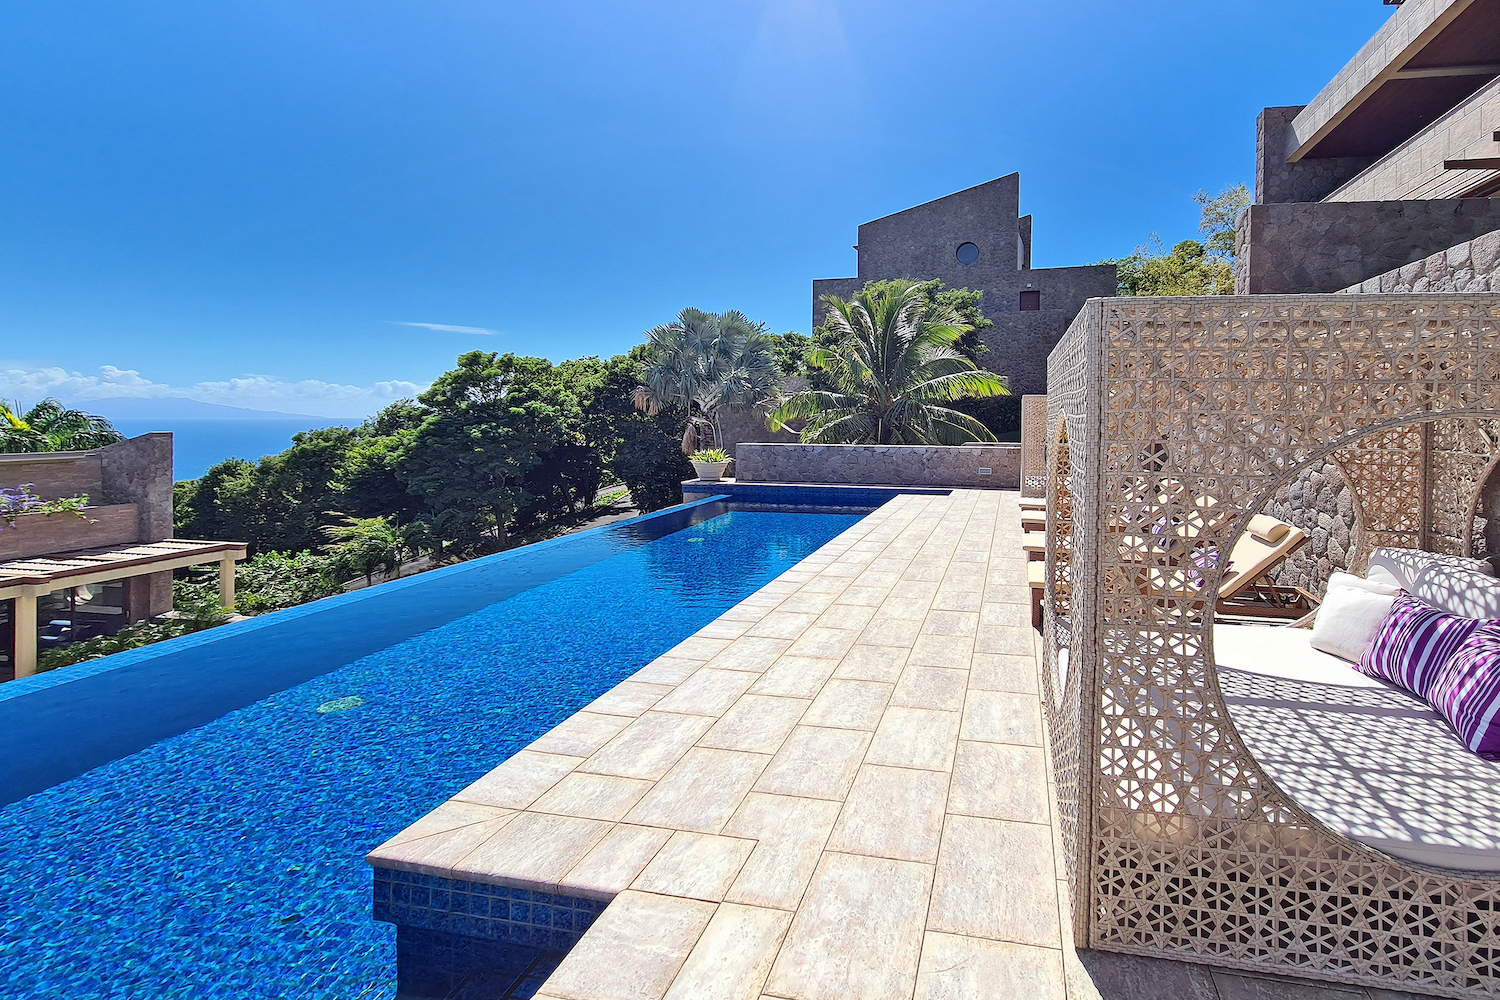 a tiled deck alongside a bright blue pool surrounded by greenery on a sunny day.